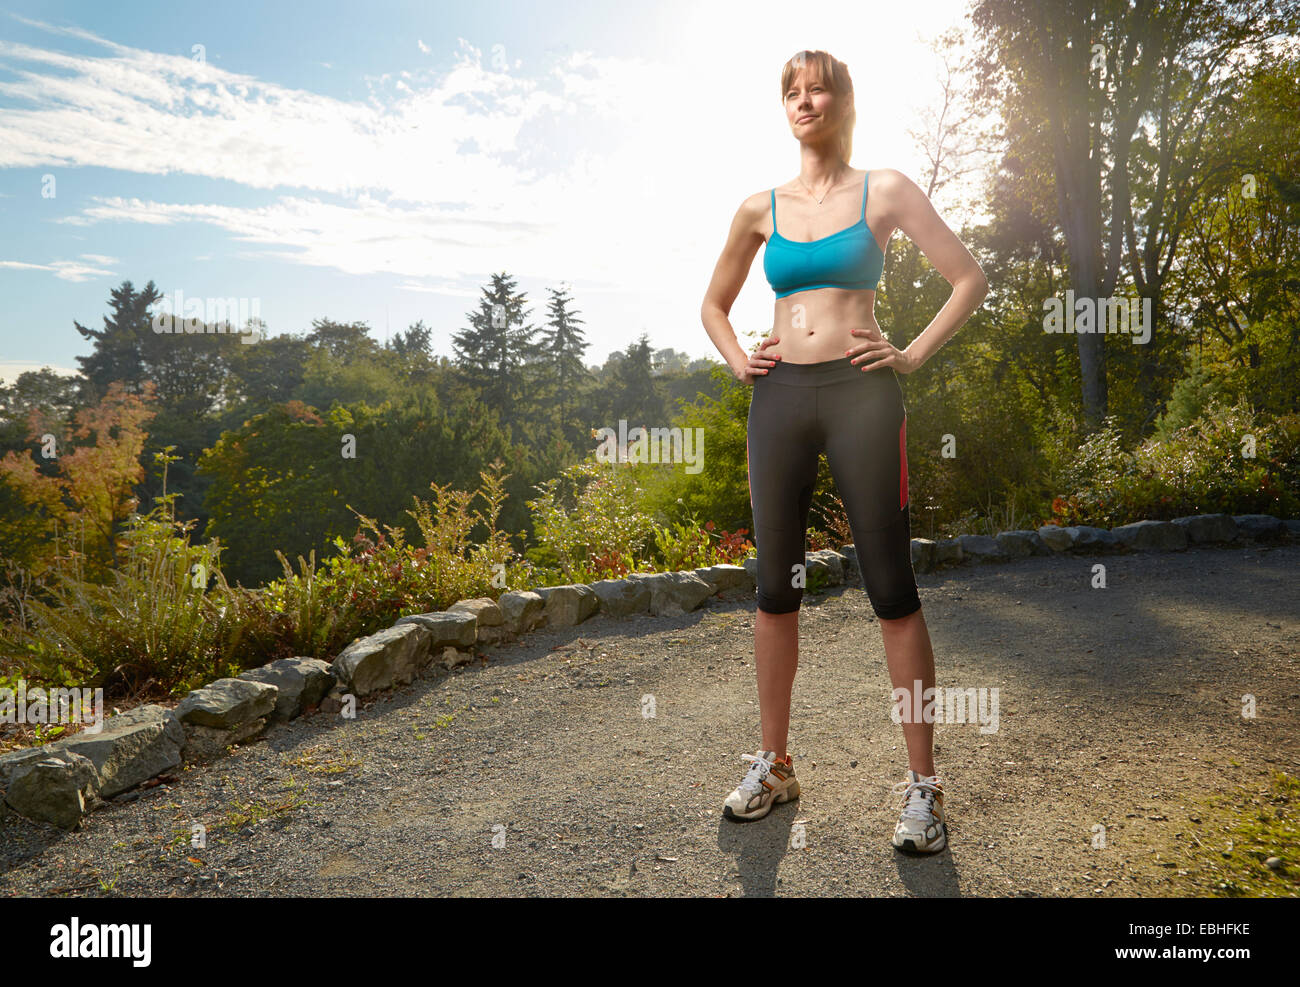 Portrait of female runner with hands on hips in park Stock Photo